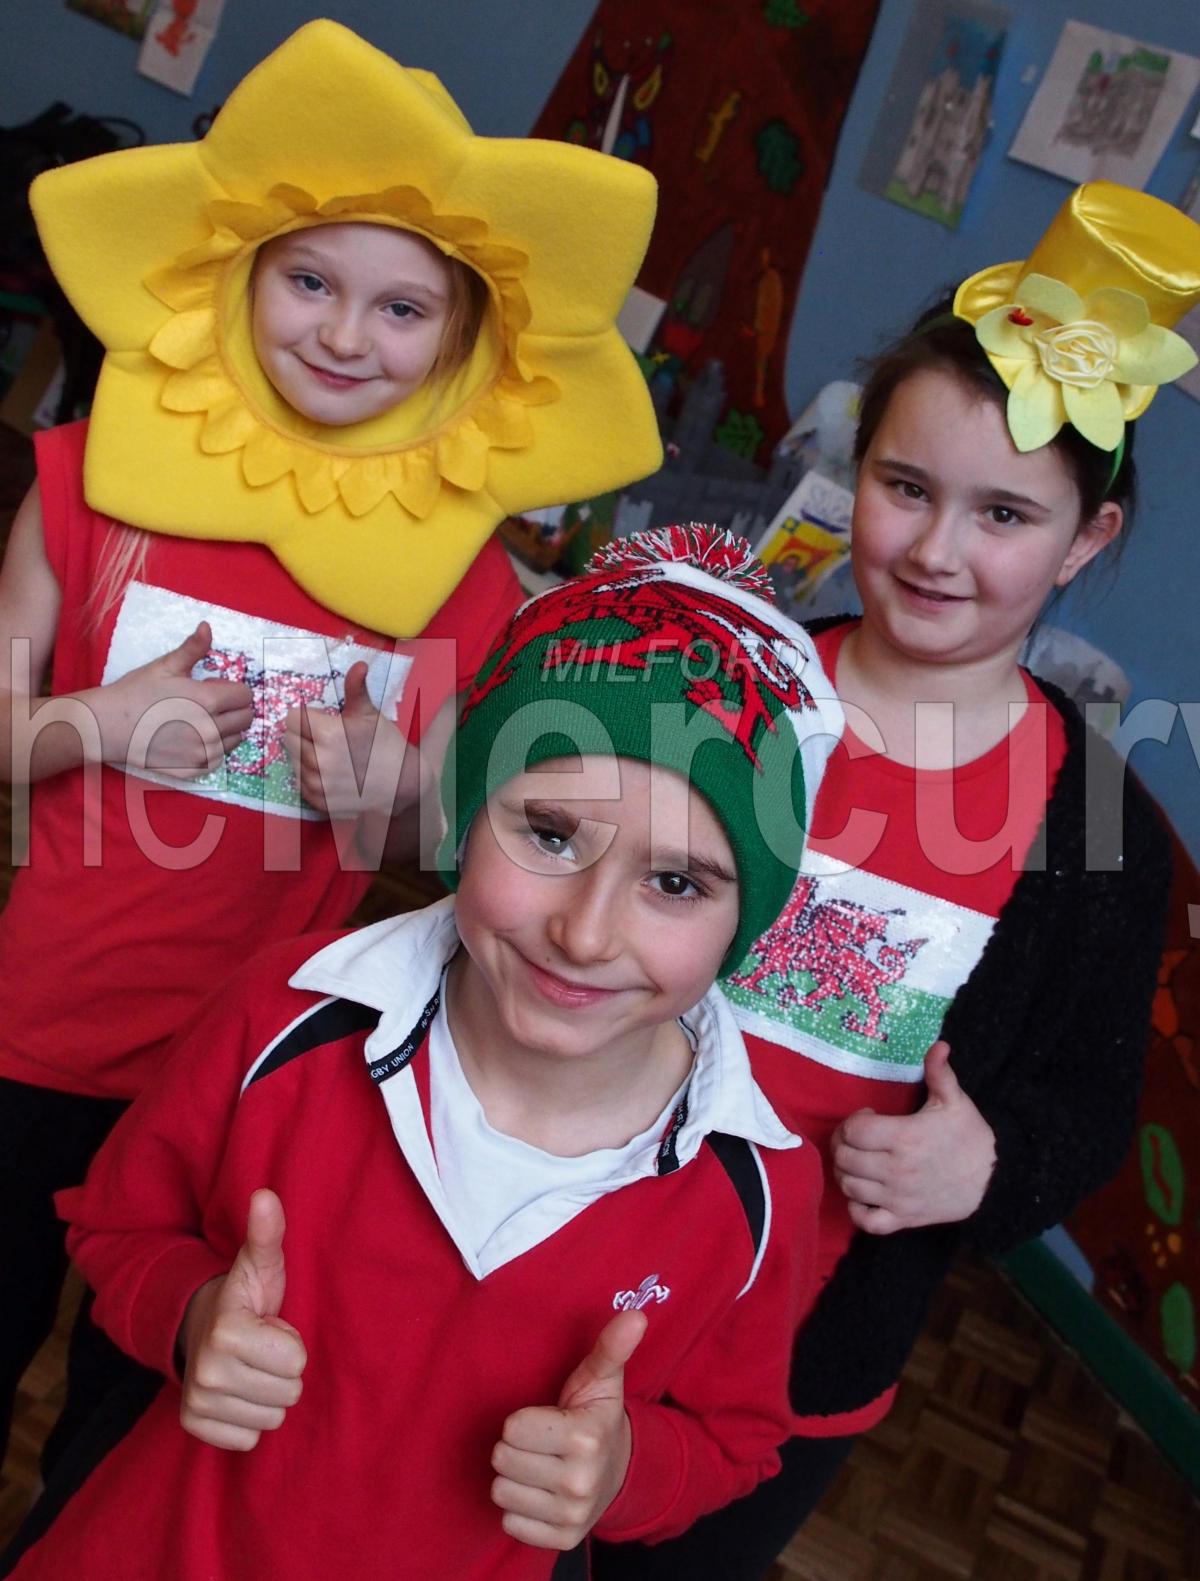 Children from Milford Haven, Hubberston and Hakin took part in the day. PICTURE: Western Telegraph/Milford Mercury